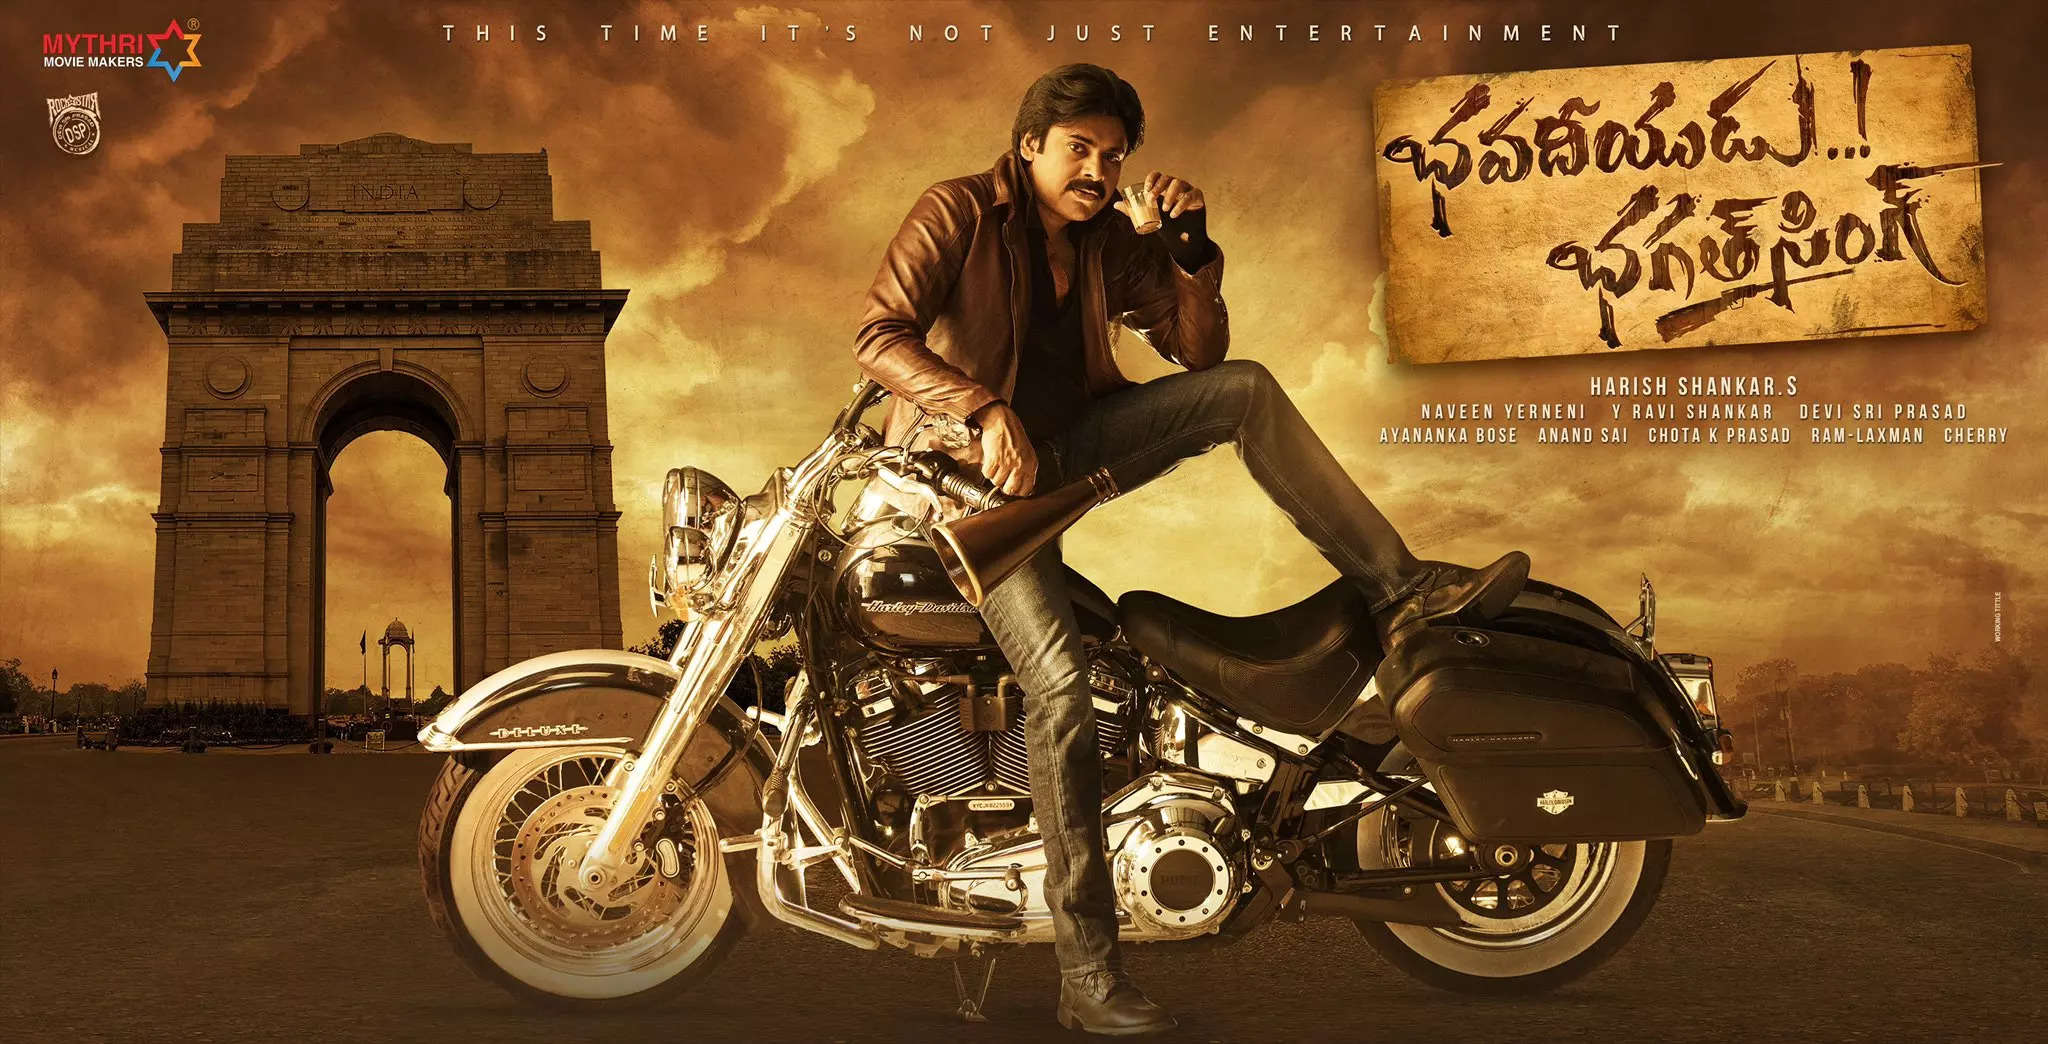 Pawan Kalyan planned the film with director Harish with another plan